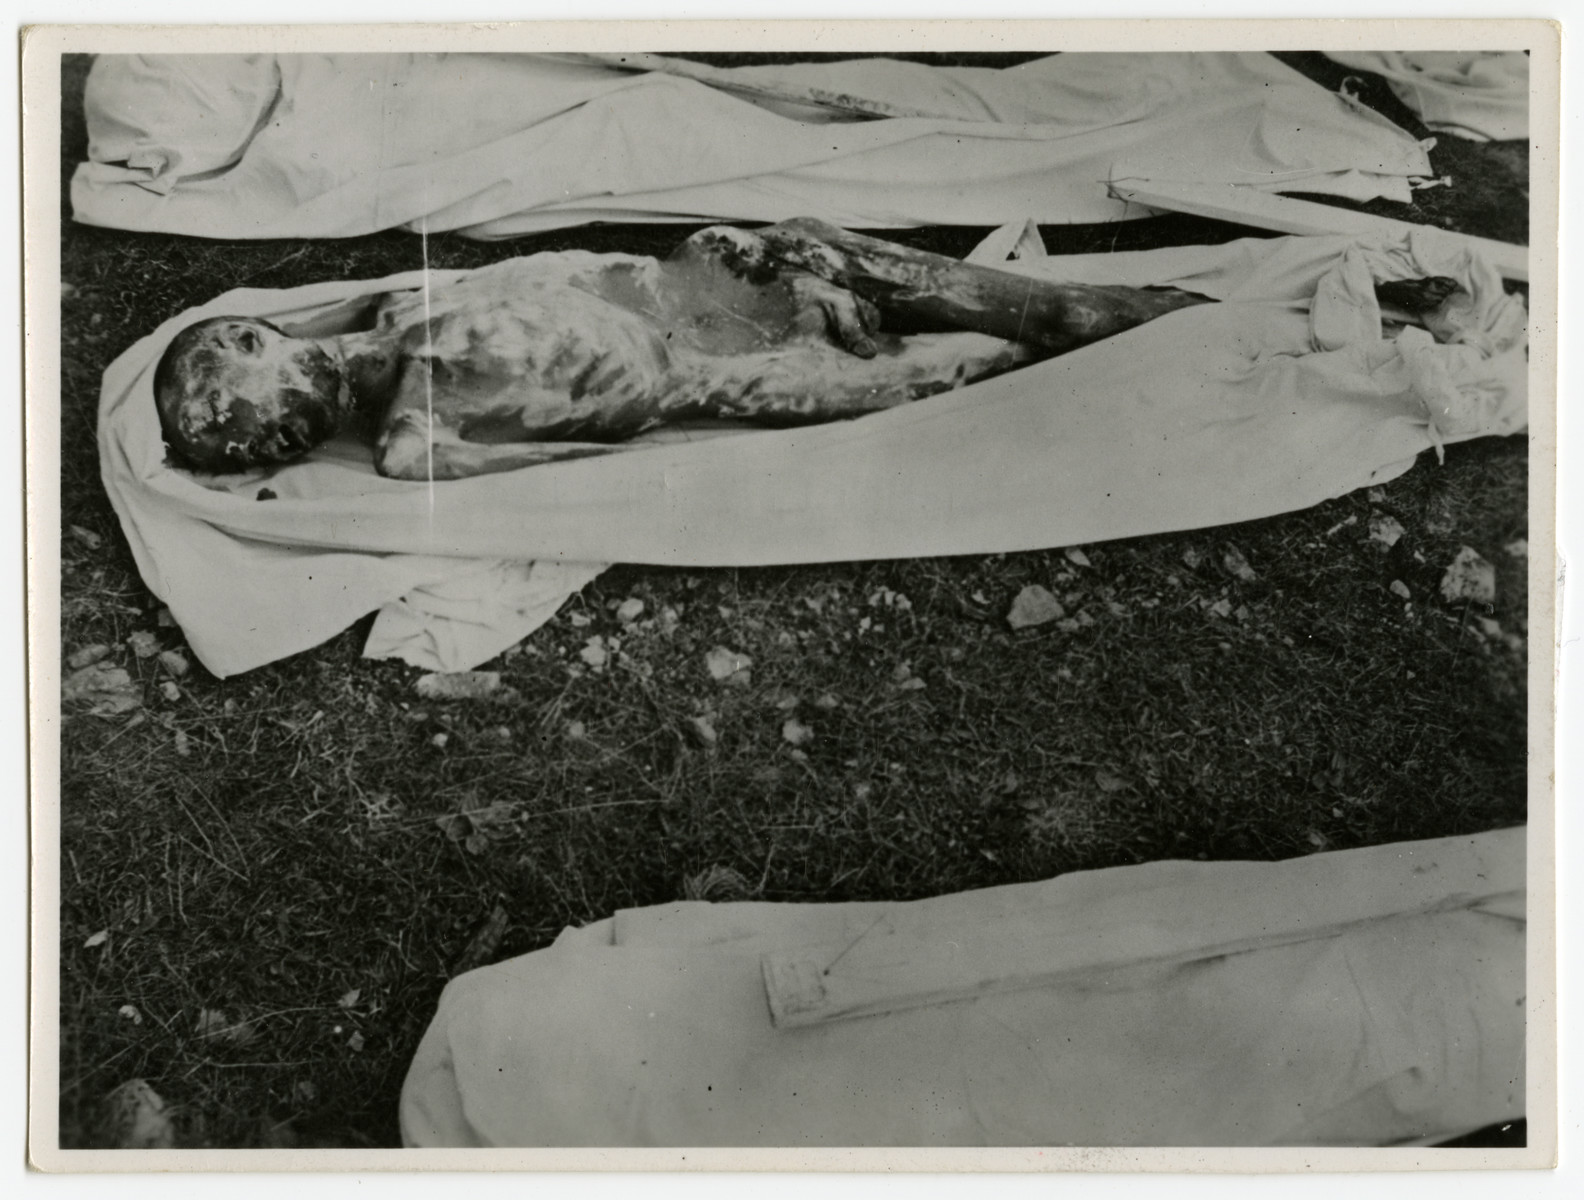 The decomposed corpse of a prisoner that has been prerpared for burial by local German civilians.  Each corpse was buried in a sheet and assigned a numbered marker. 

The original caption reads, "Bodies prepared for burial by the civilians of Ohrdruf Germany. Some have probably been dead for several weeks. Ohrdruf concentration camp, Germany." [sic]